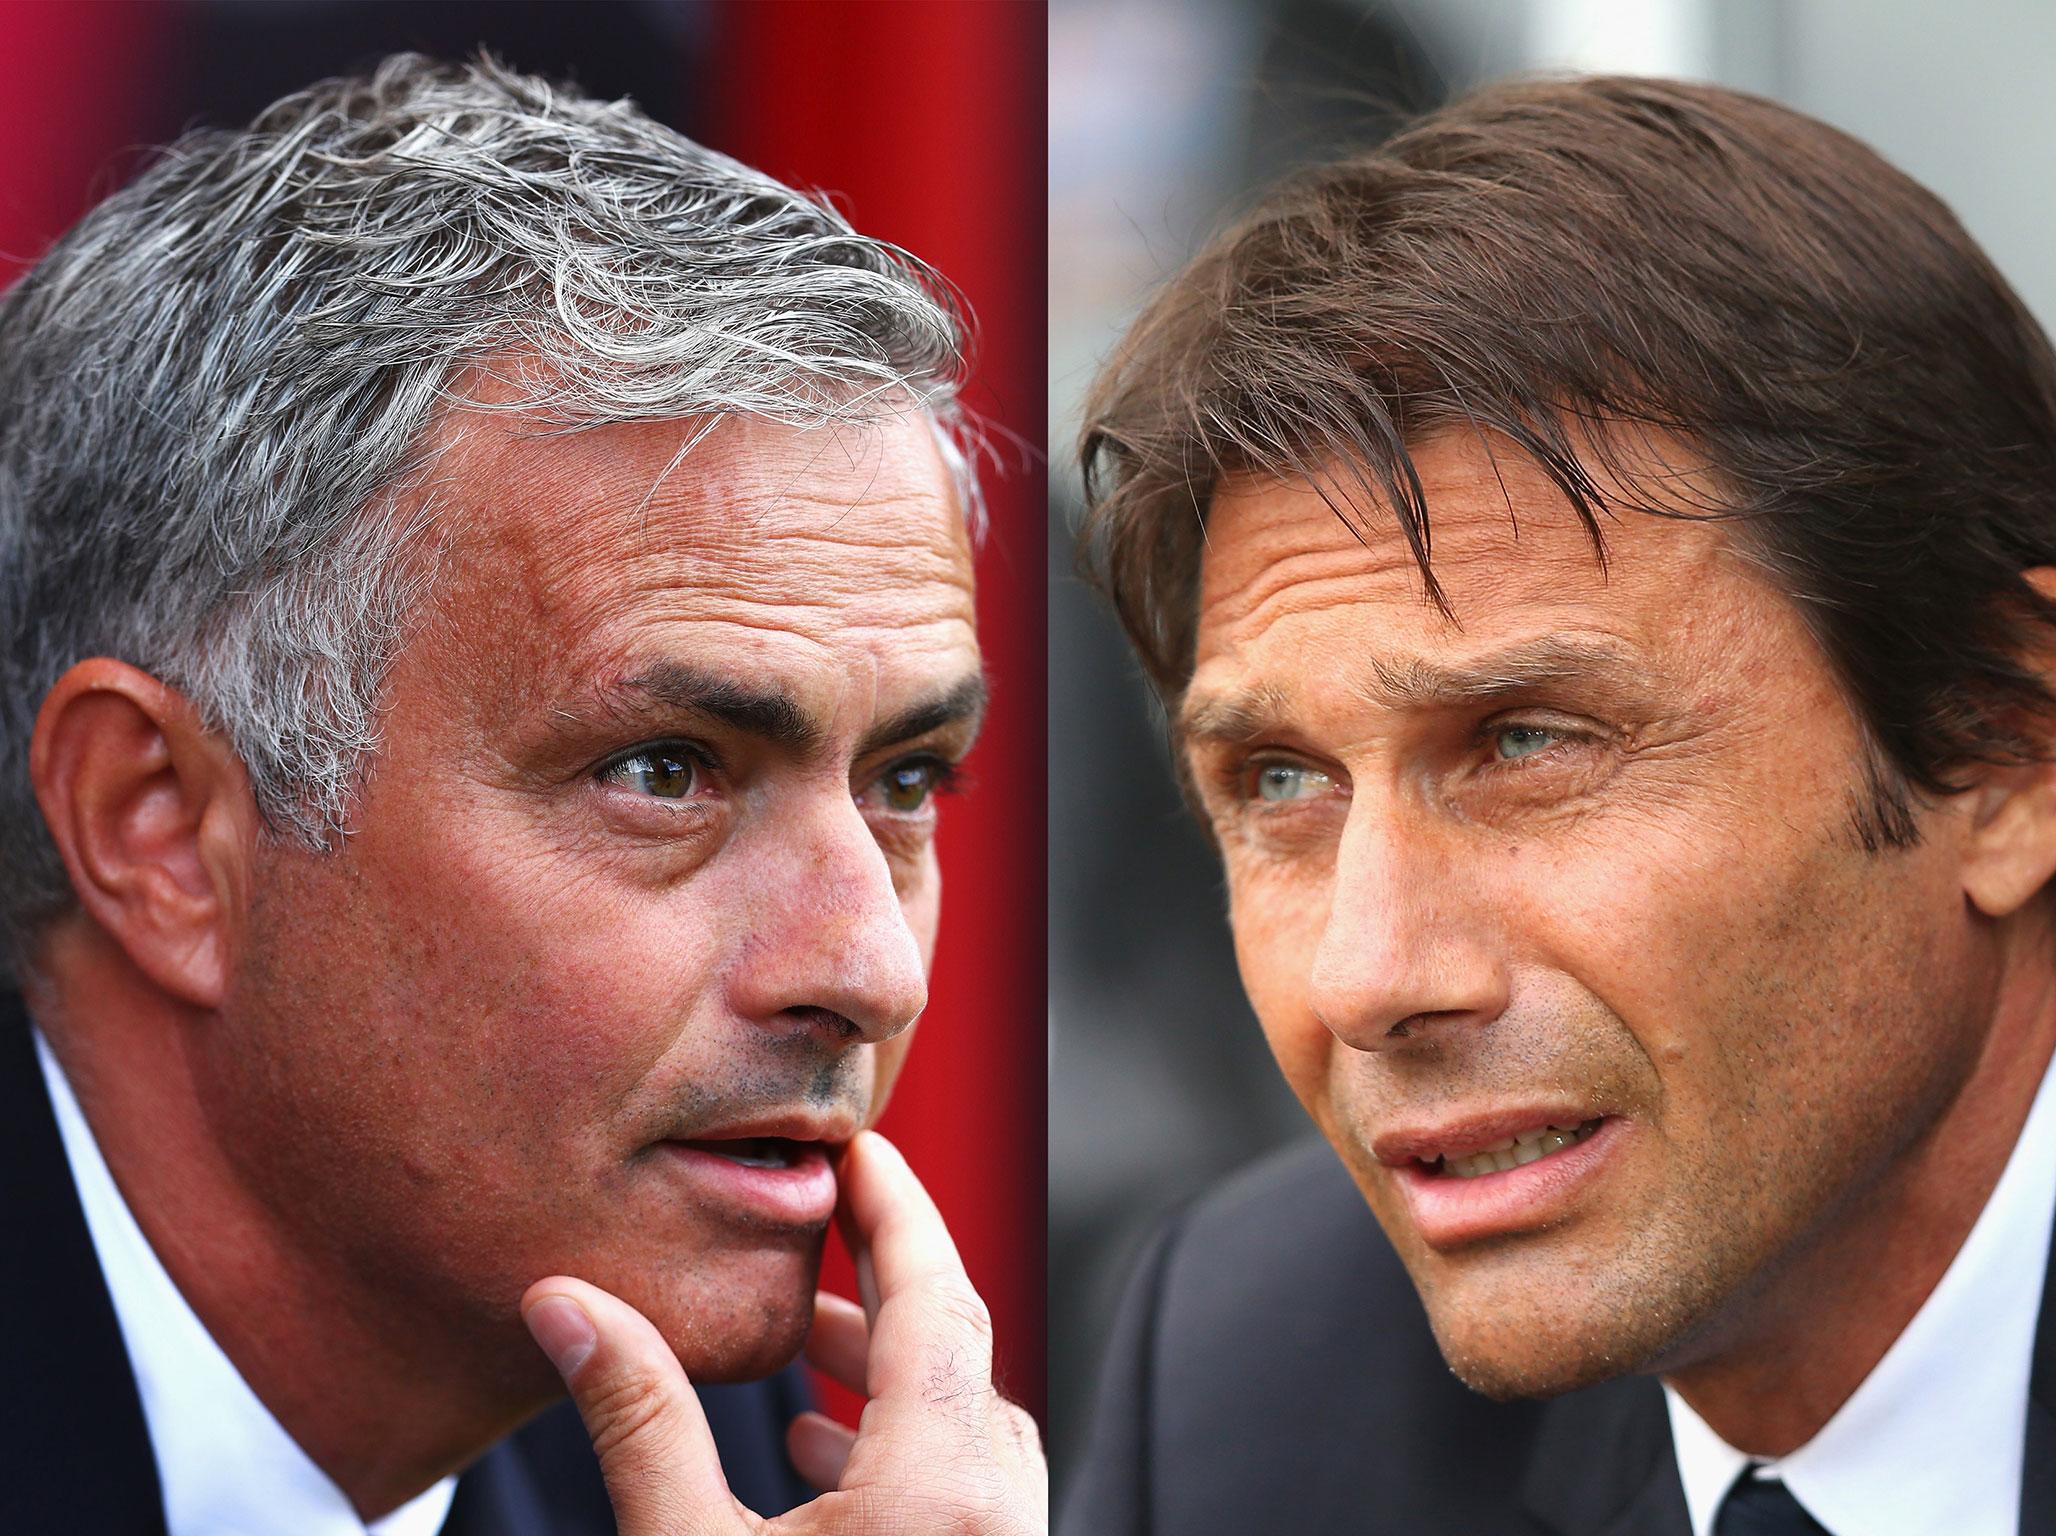 Antonio Conte insists he 'won't forget' the recent war of words between him and Mourinho